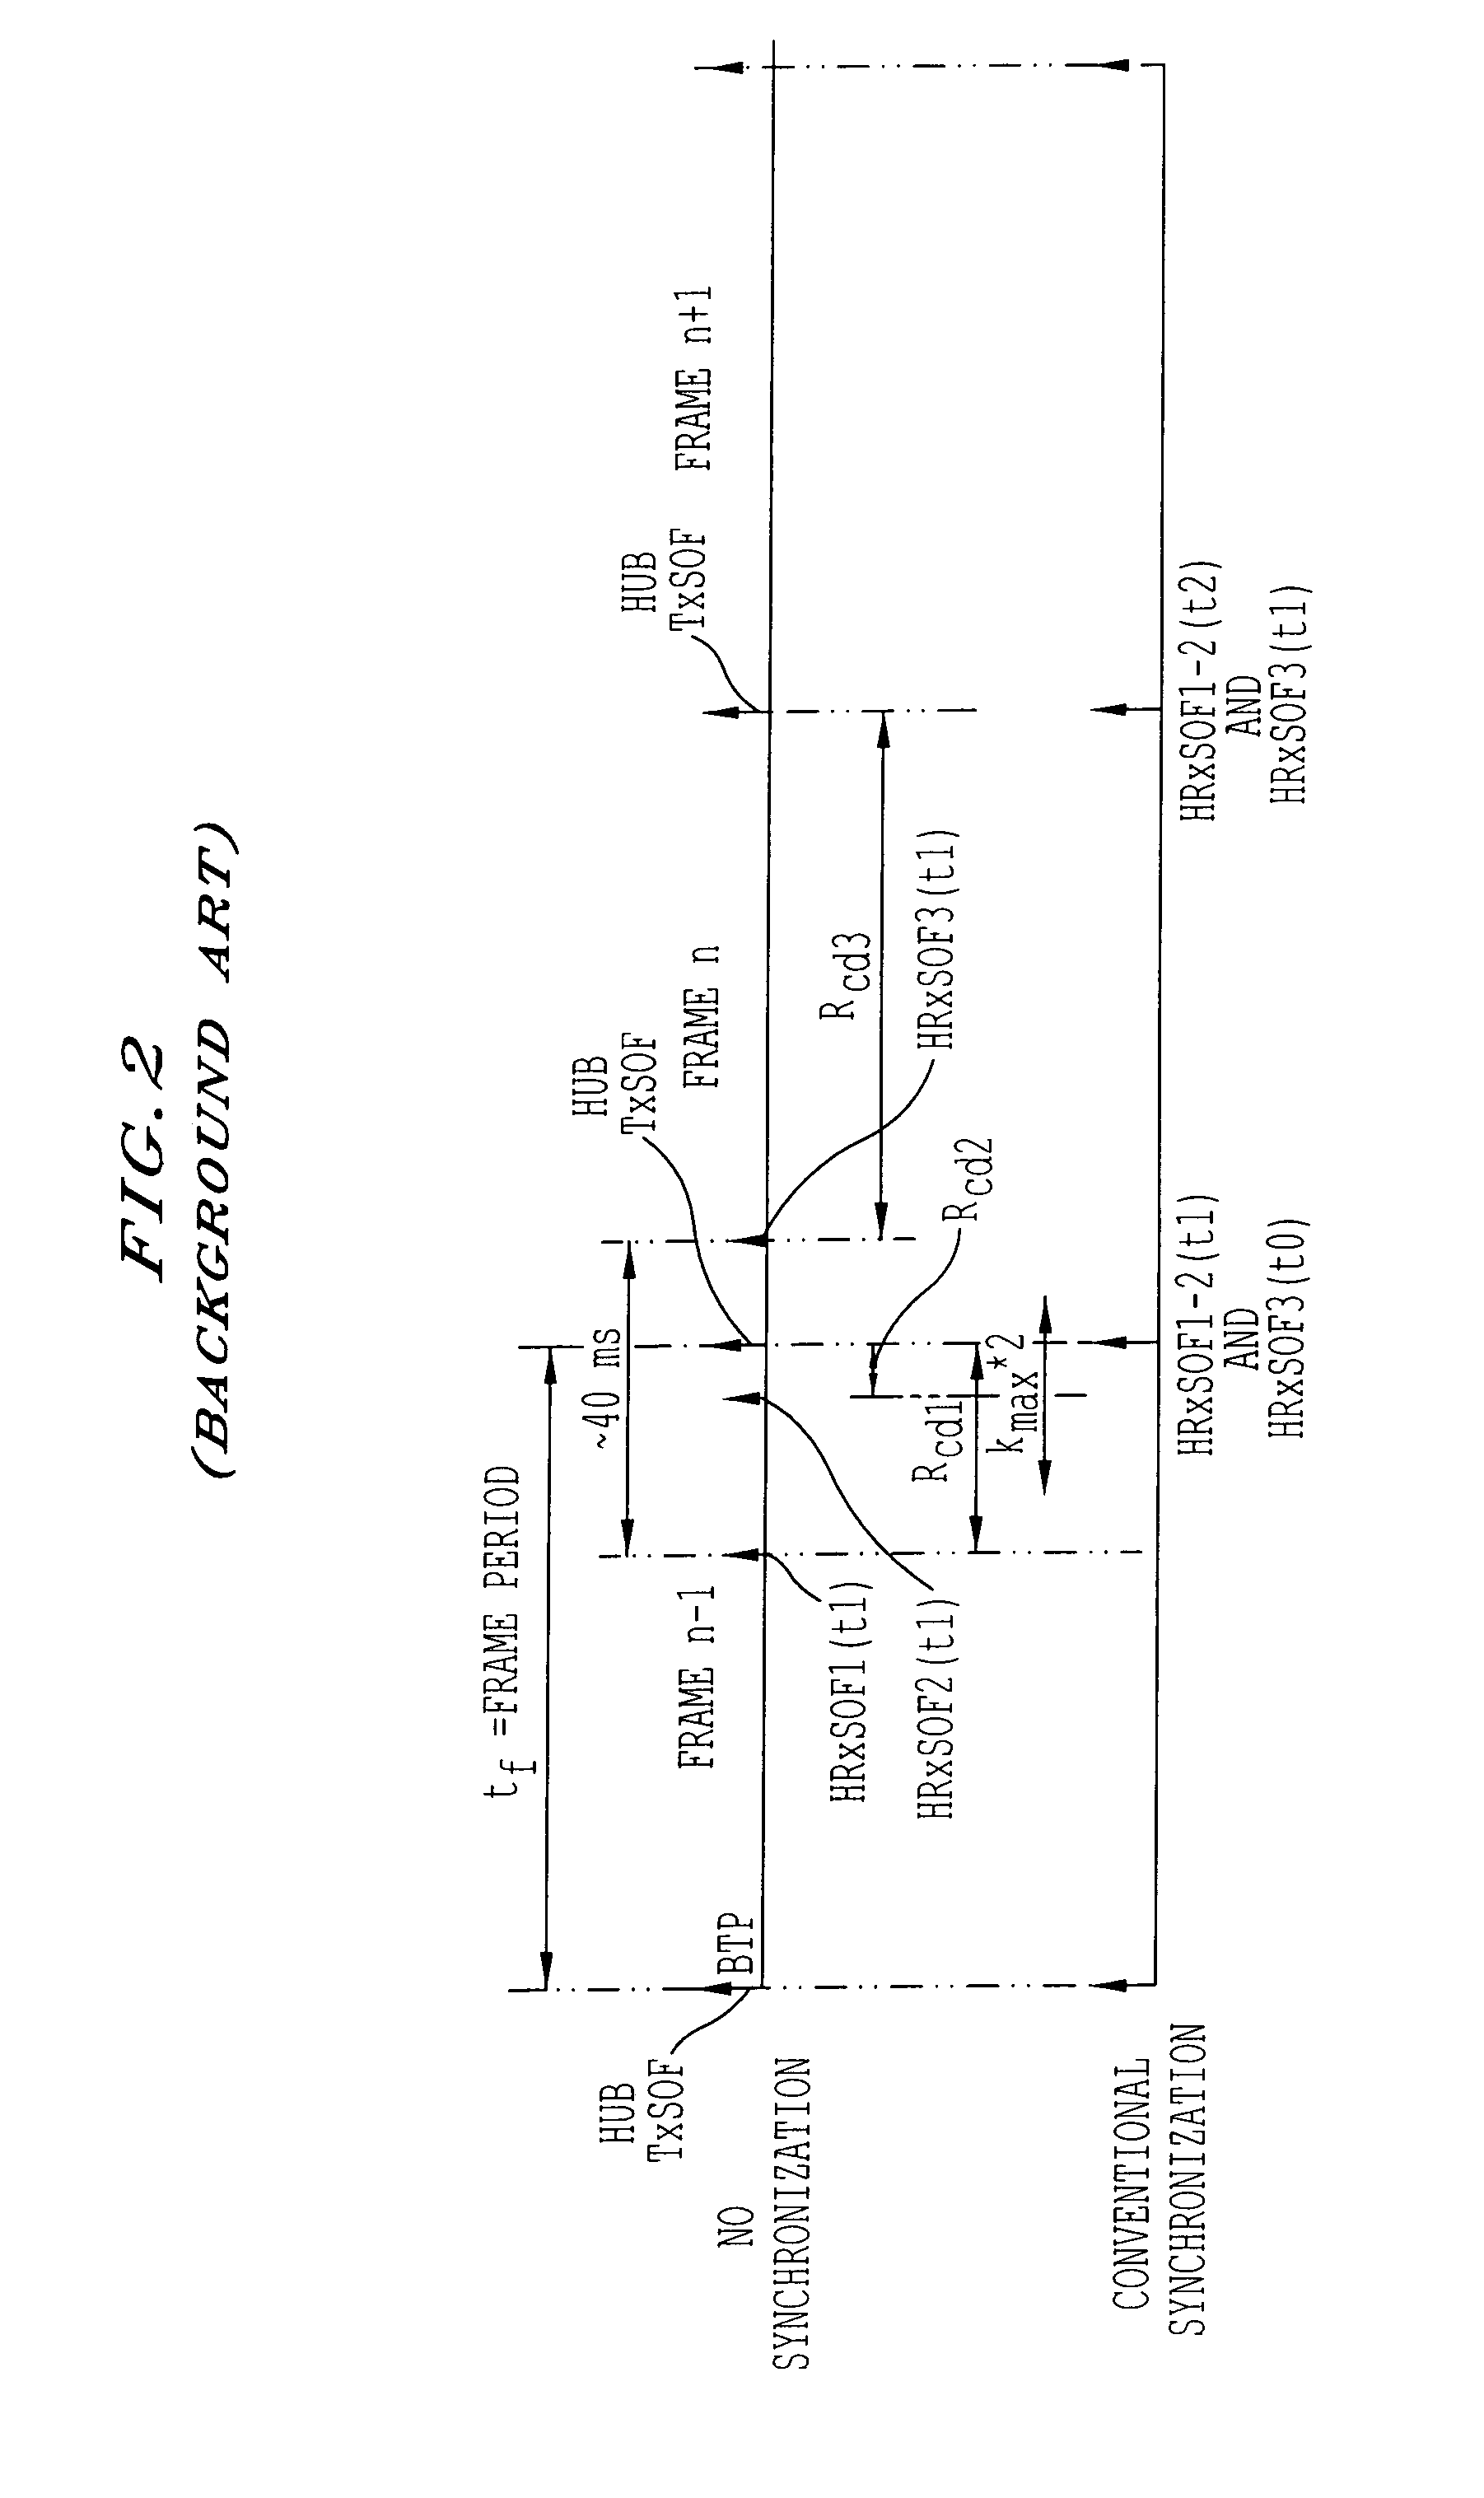 Method, apparatus, and system for transmitting control information in a communication network